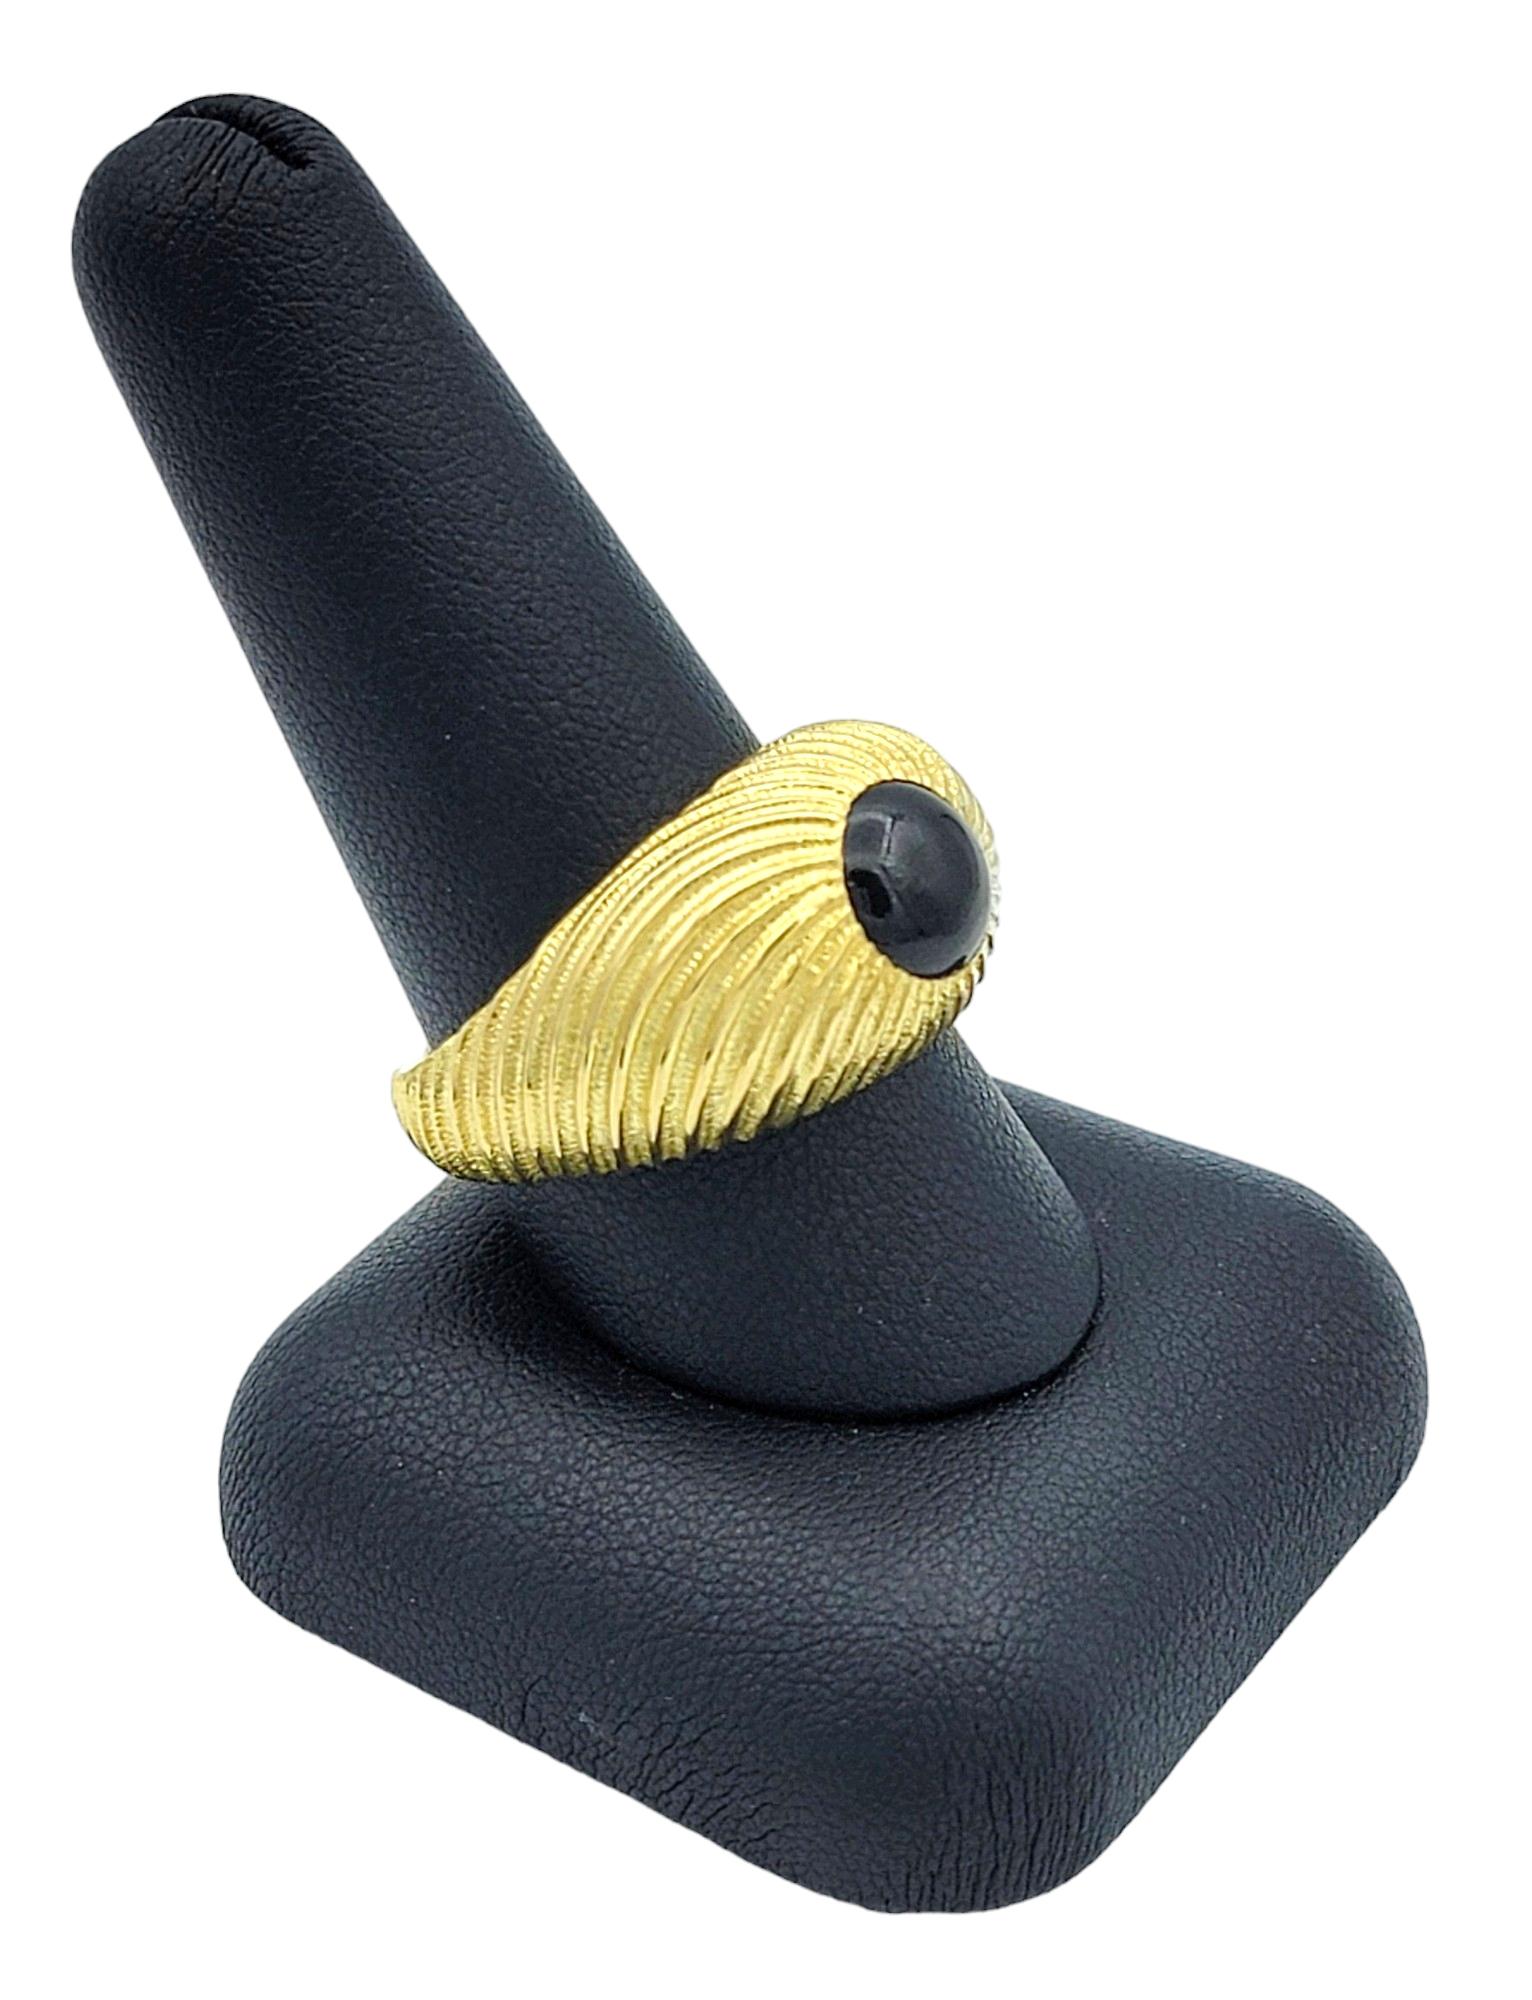 Tiffany & Co. Schlumberger Shrimp Style Black Onyx Ring in 18 Karat Yellow Gold For Sale 6